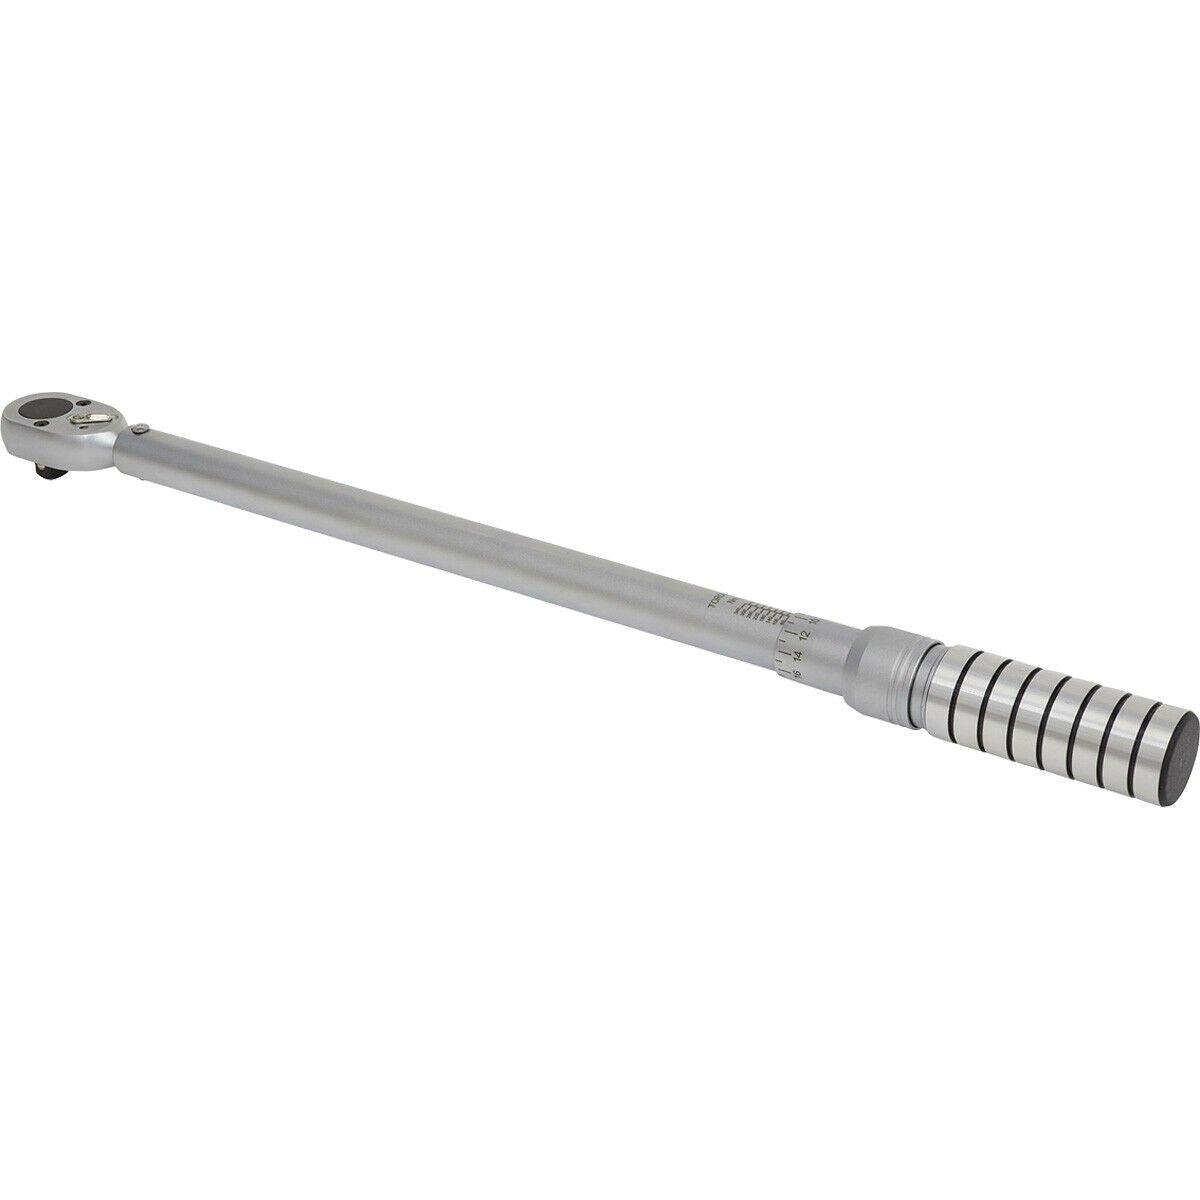 Micrometer Style Torque Wrench - 1/2